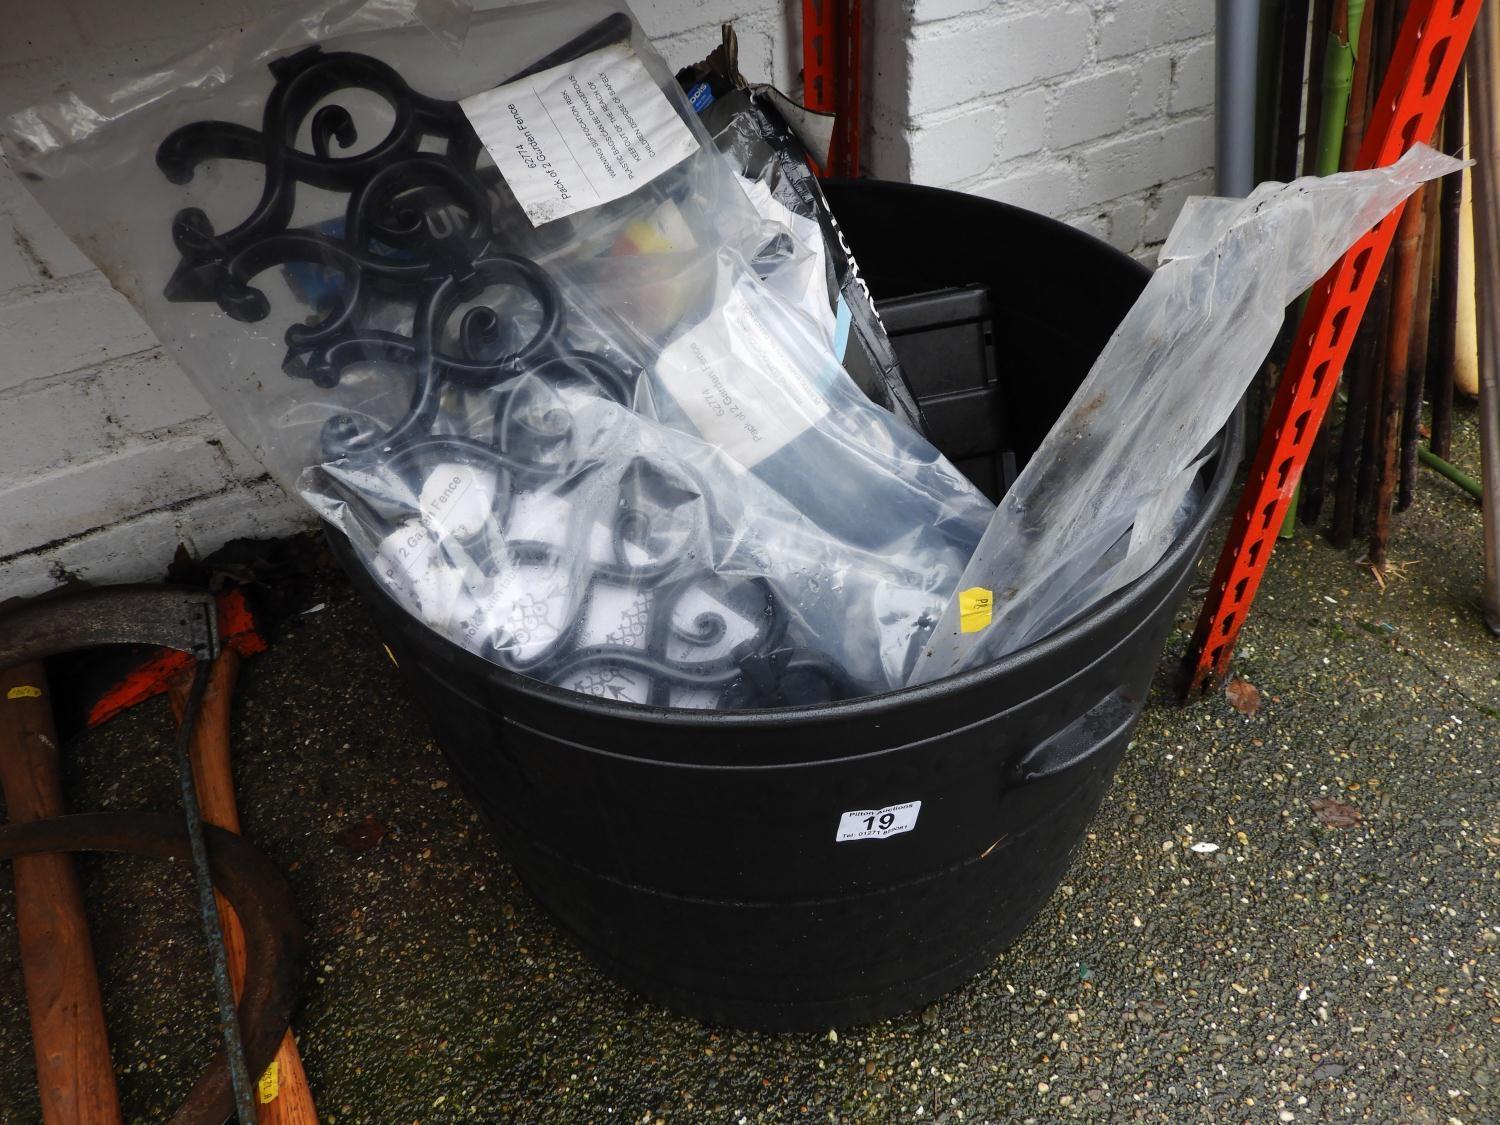 Rubber Bucket and Contents - Plastic Garden Fence etc